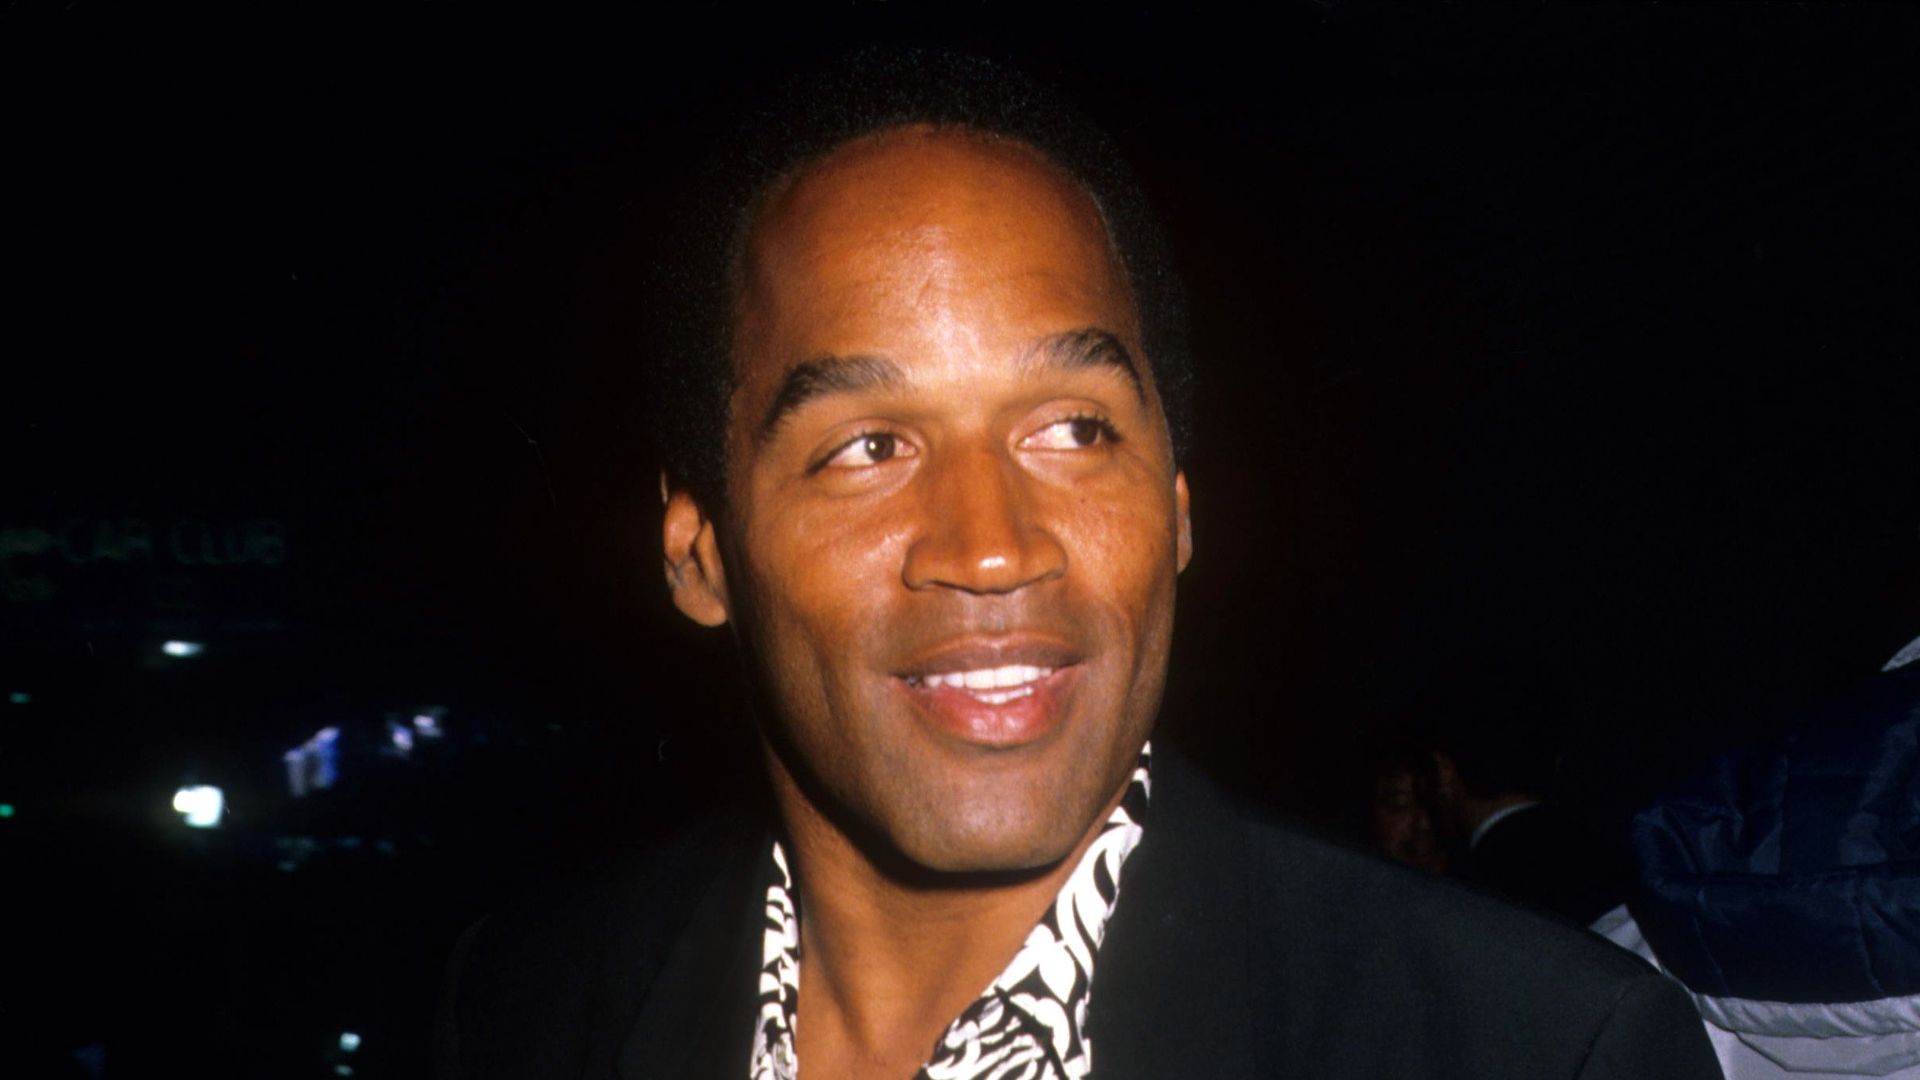 Actor and former NFL player O.J. Simpson arrives at a movie premiere circa 1990 in Los Angeles, California.